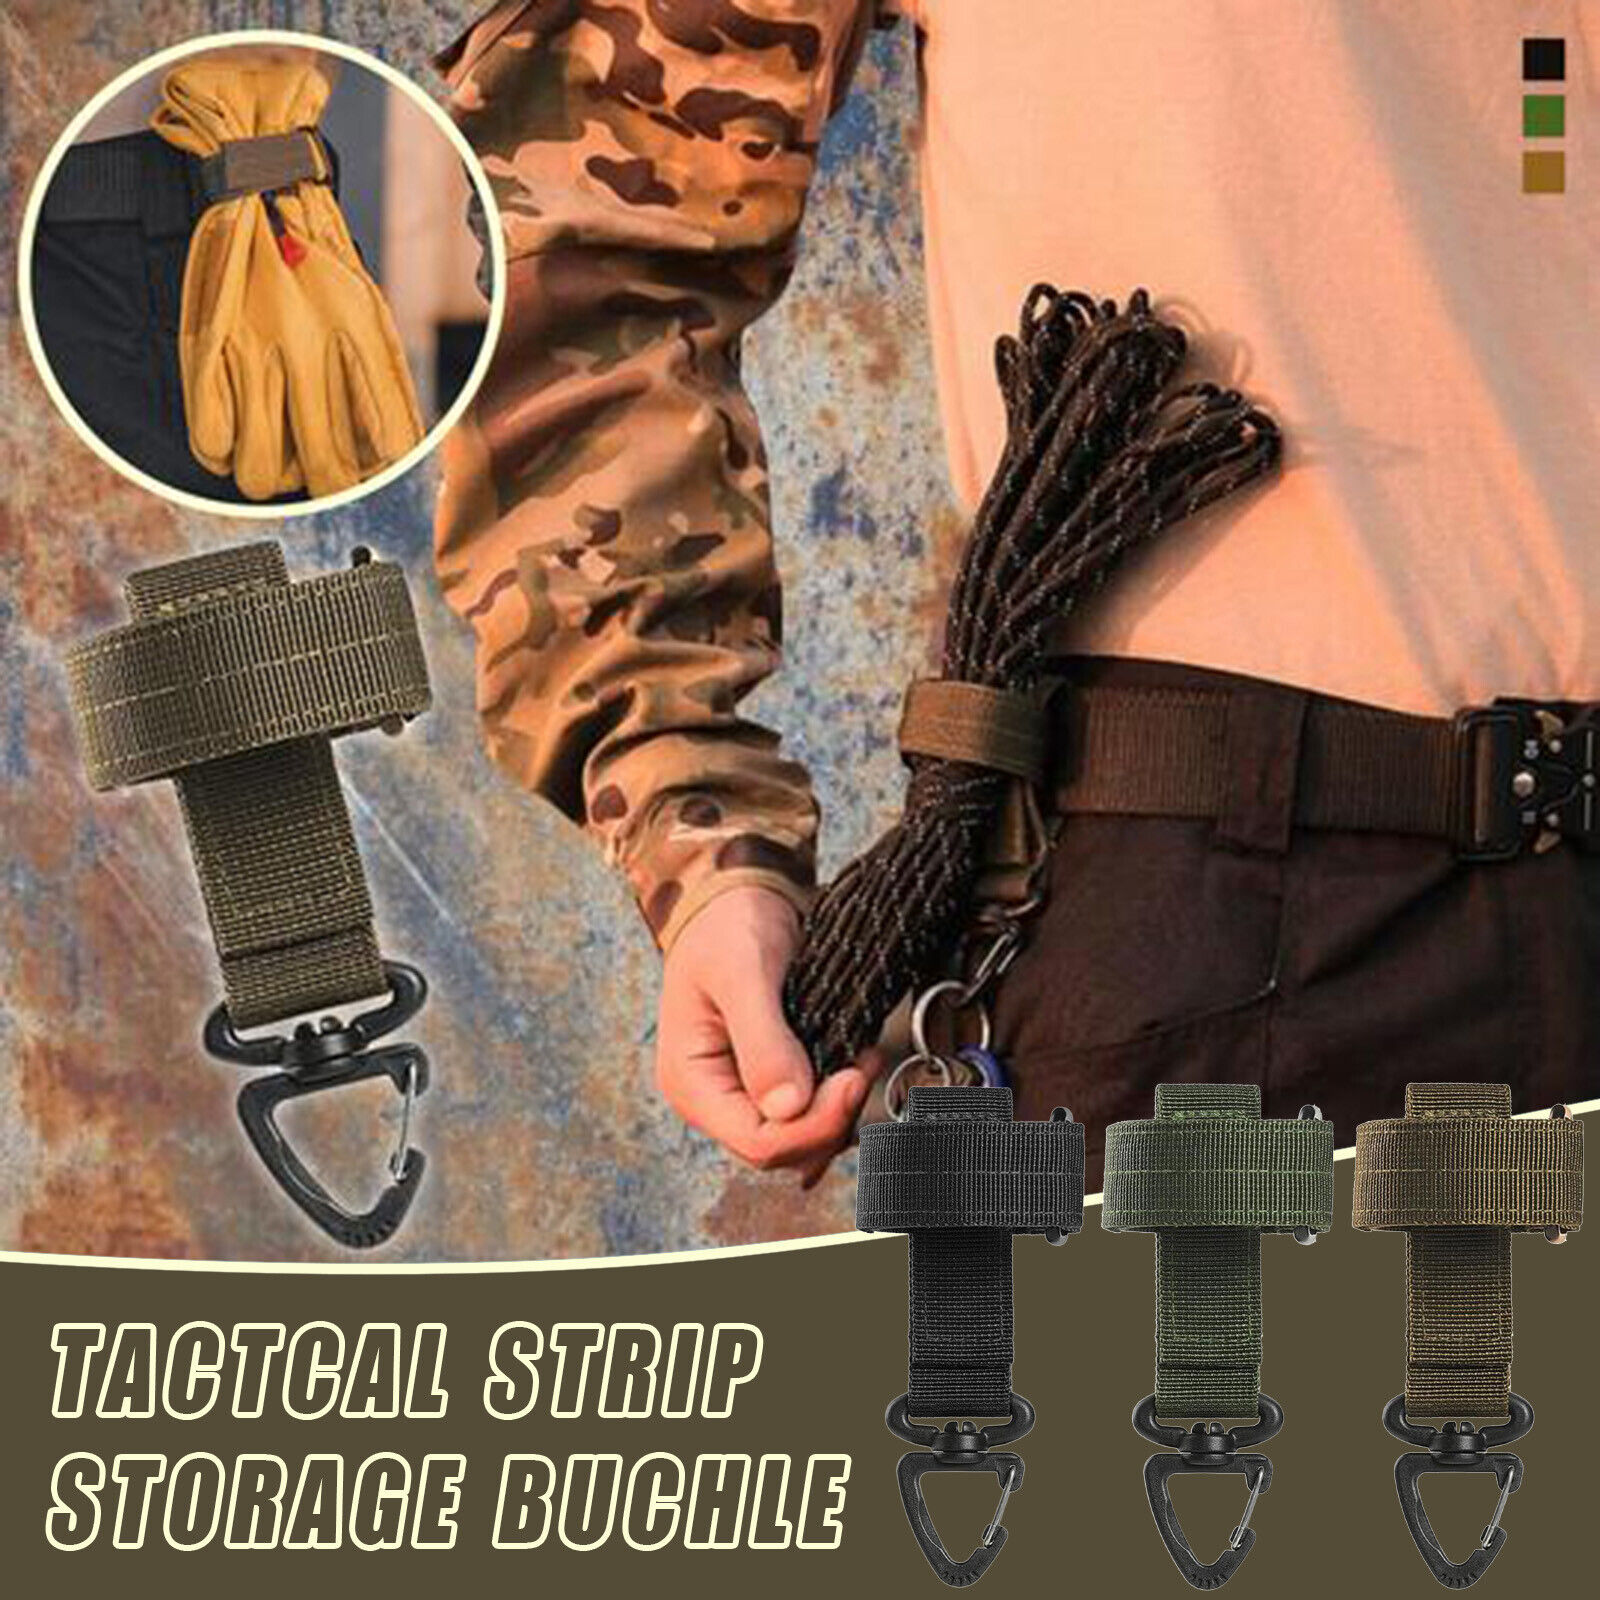 Outdoor Gloves Climbing Rope Storage Buckle Multi-purpose Glove Hanging New